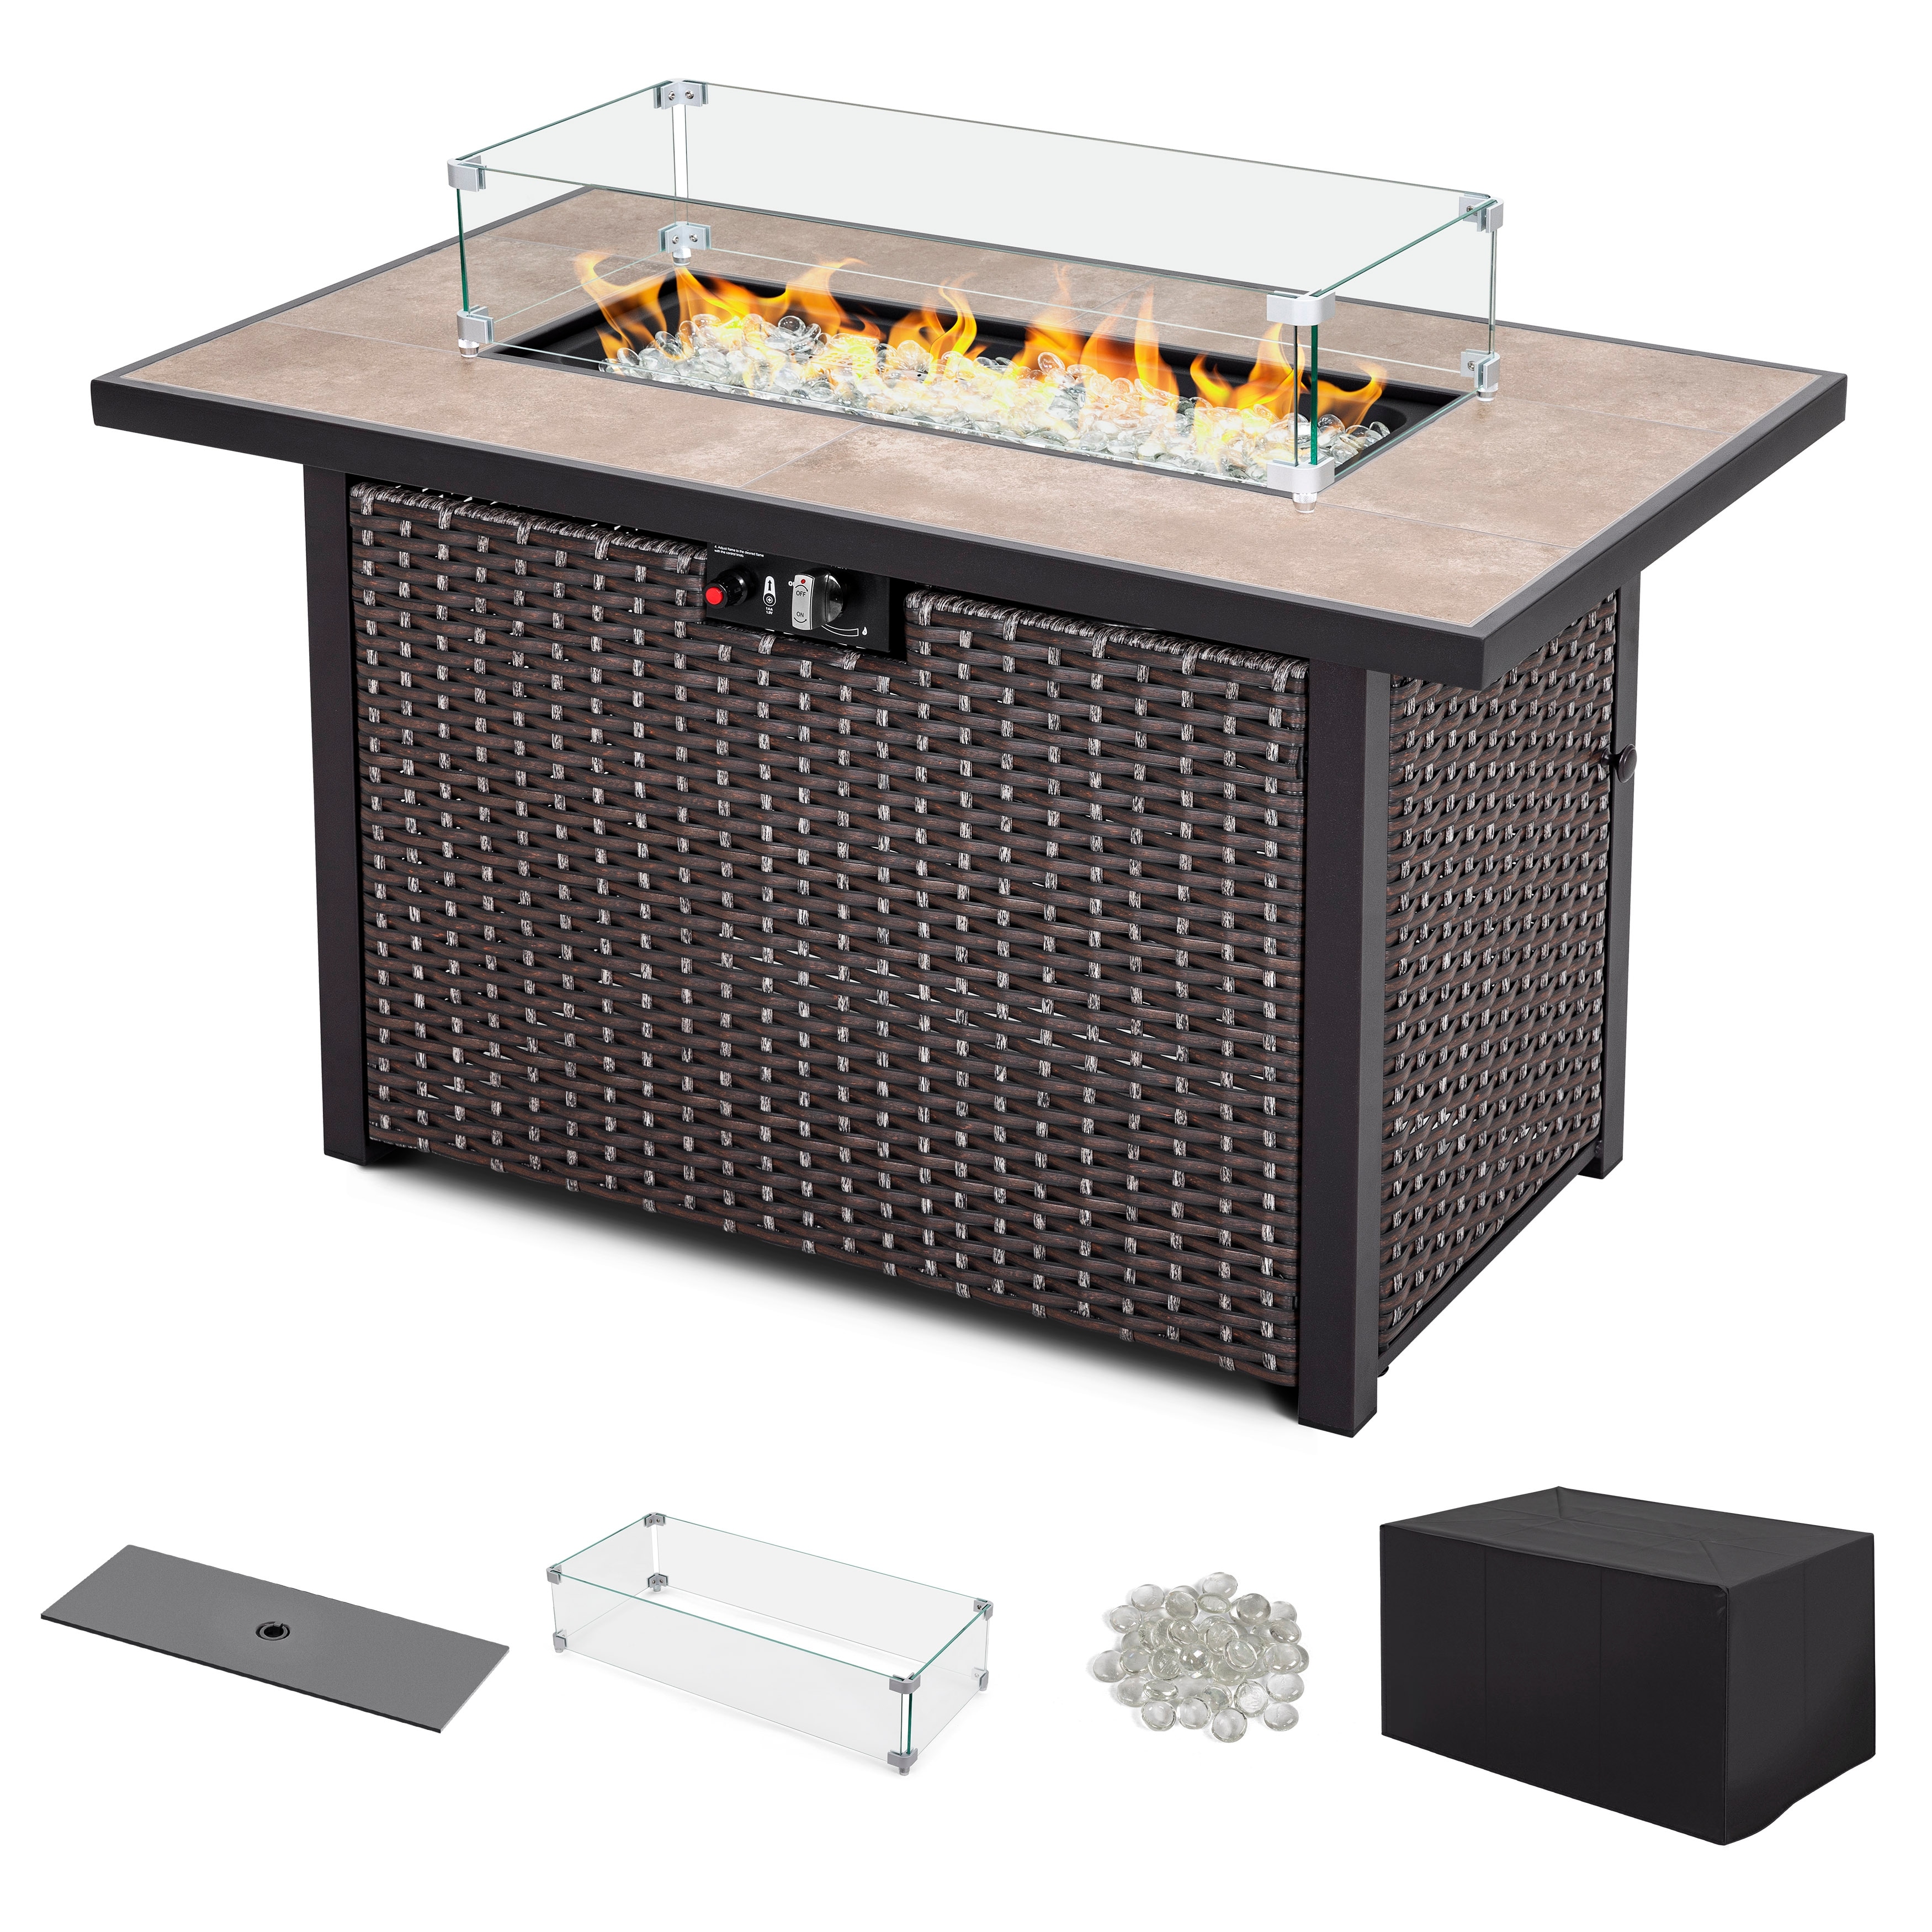 Nuu Garden 43 Inch Slate and Wicker Outdoor Firepit Table